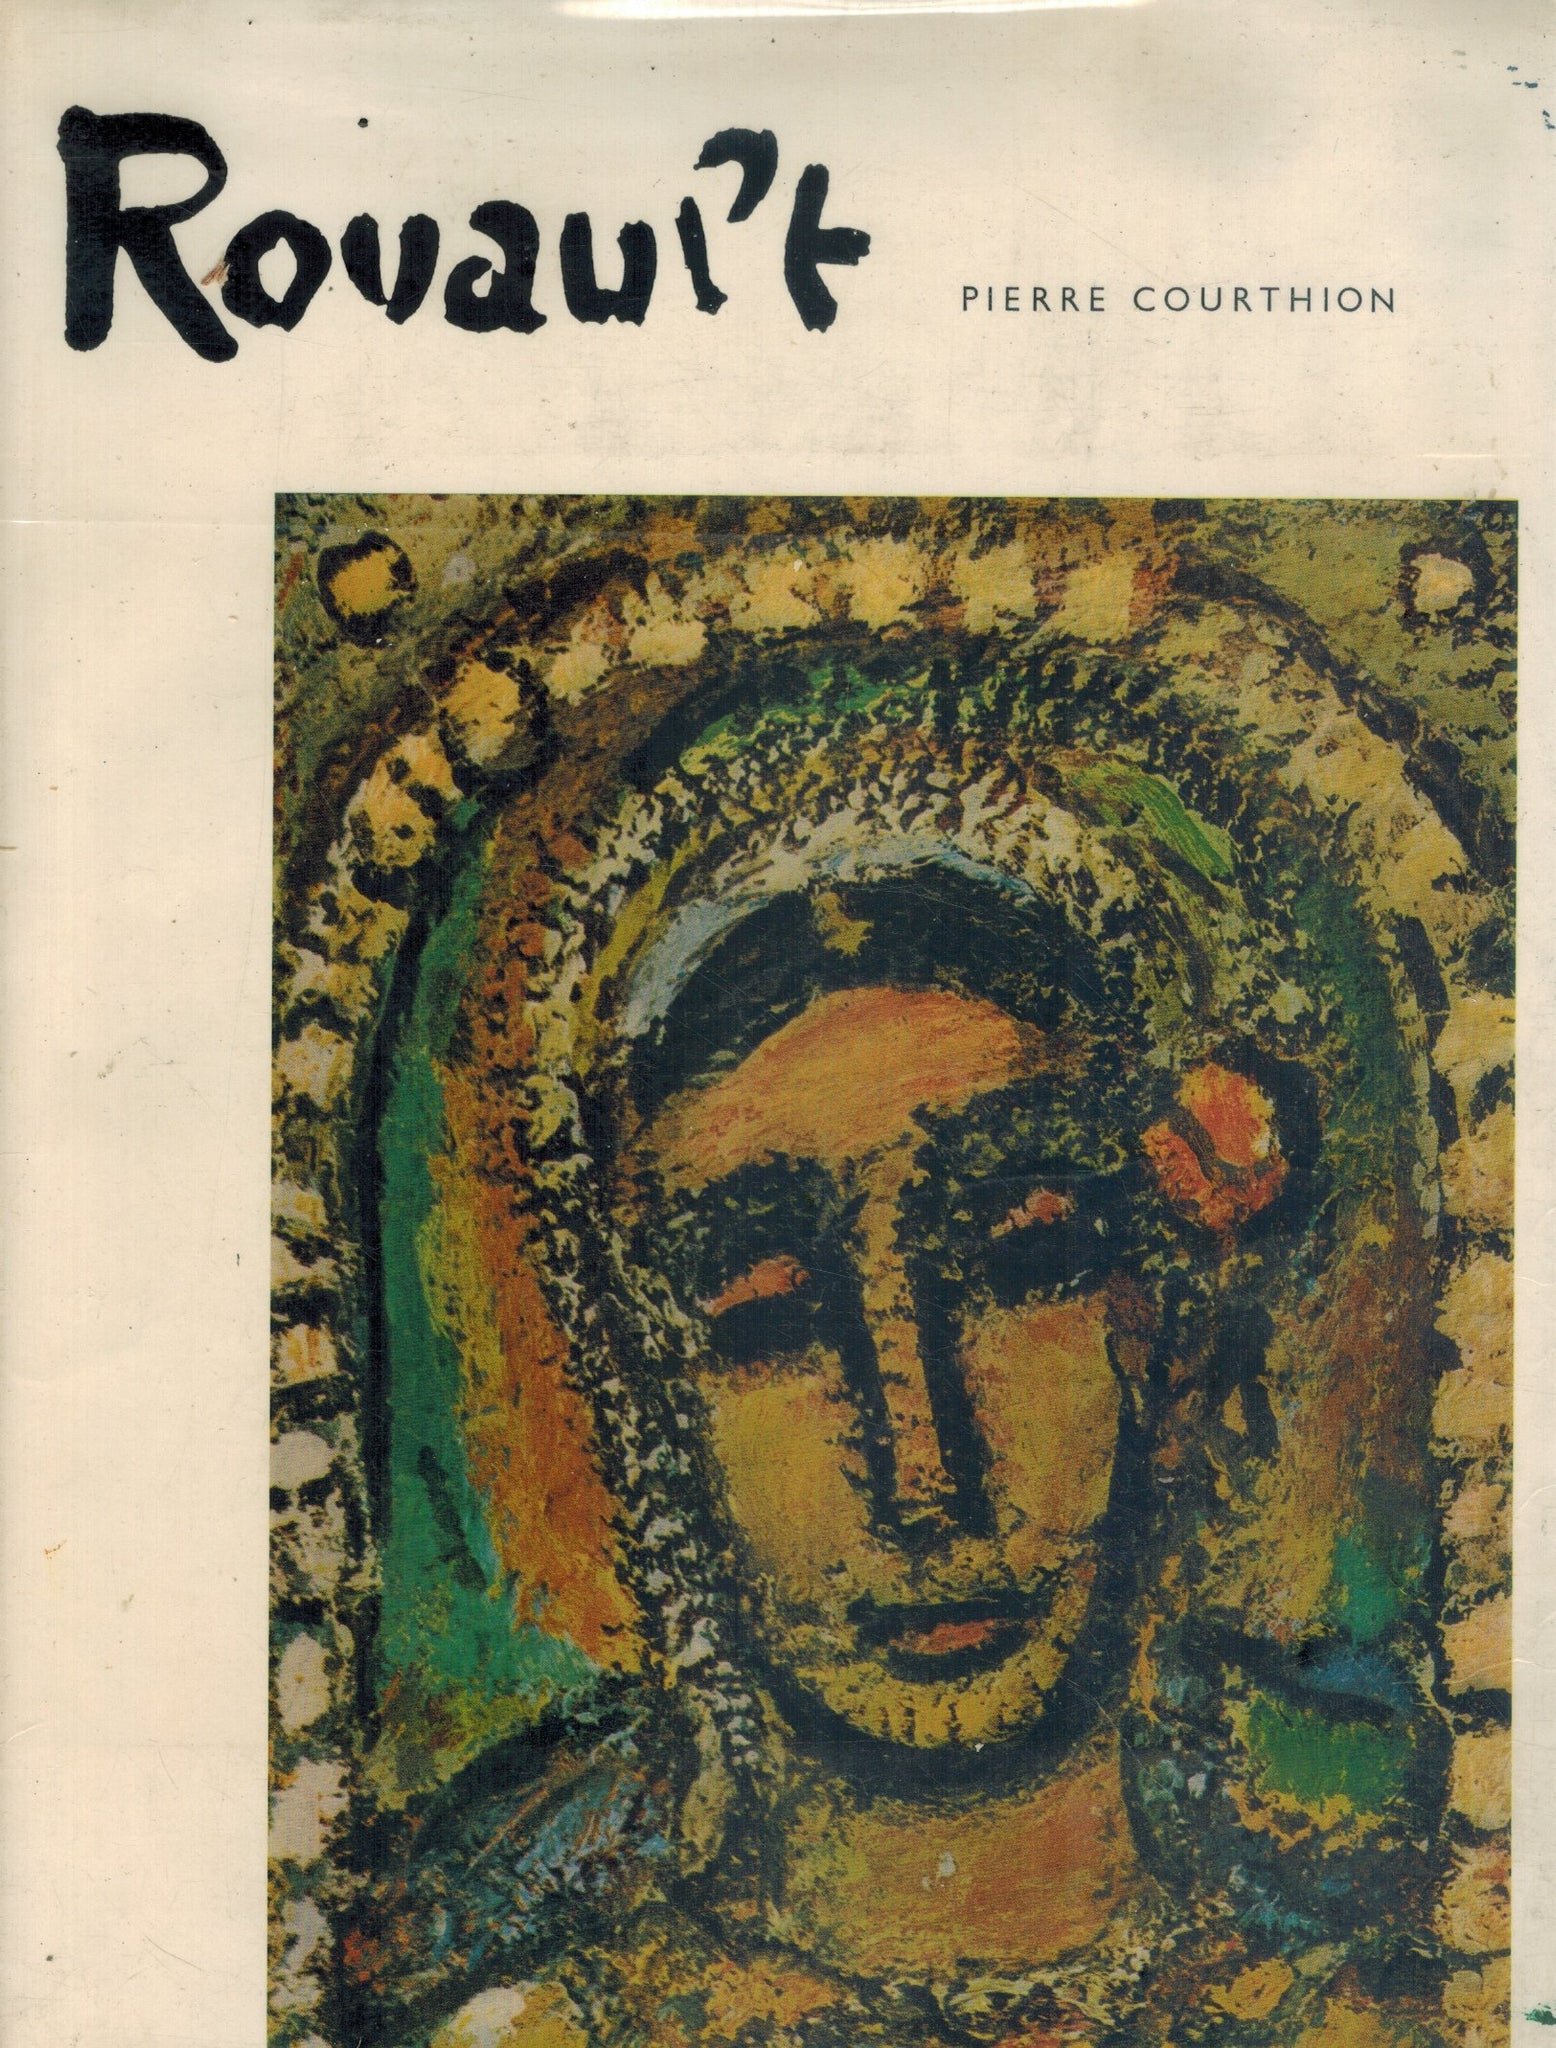 GEORGES ROUAULT INCLUDING A CATALOGUE OF WORKS PREPARED WITH THE  COLLABORATION OF ISABELLE ROUAULT  by Rouault, Georges & Pierre Courthion